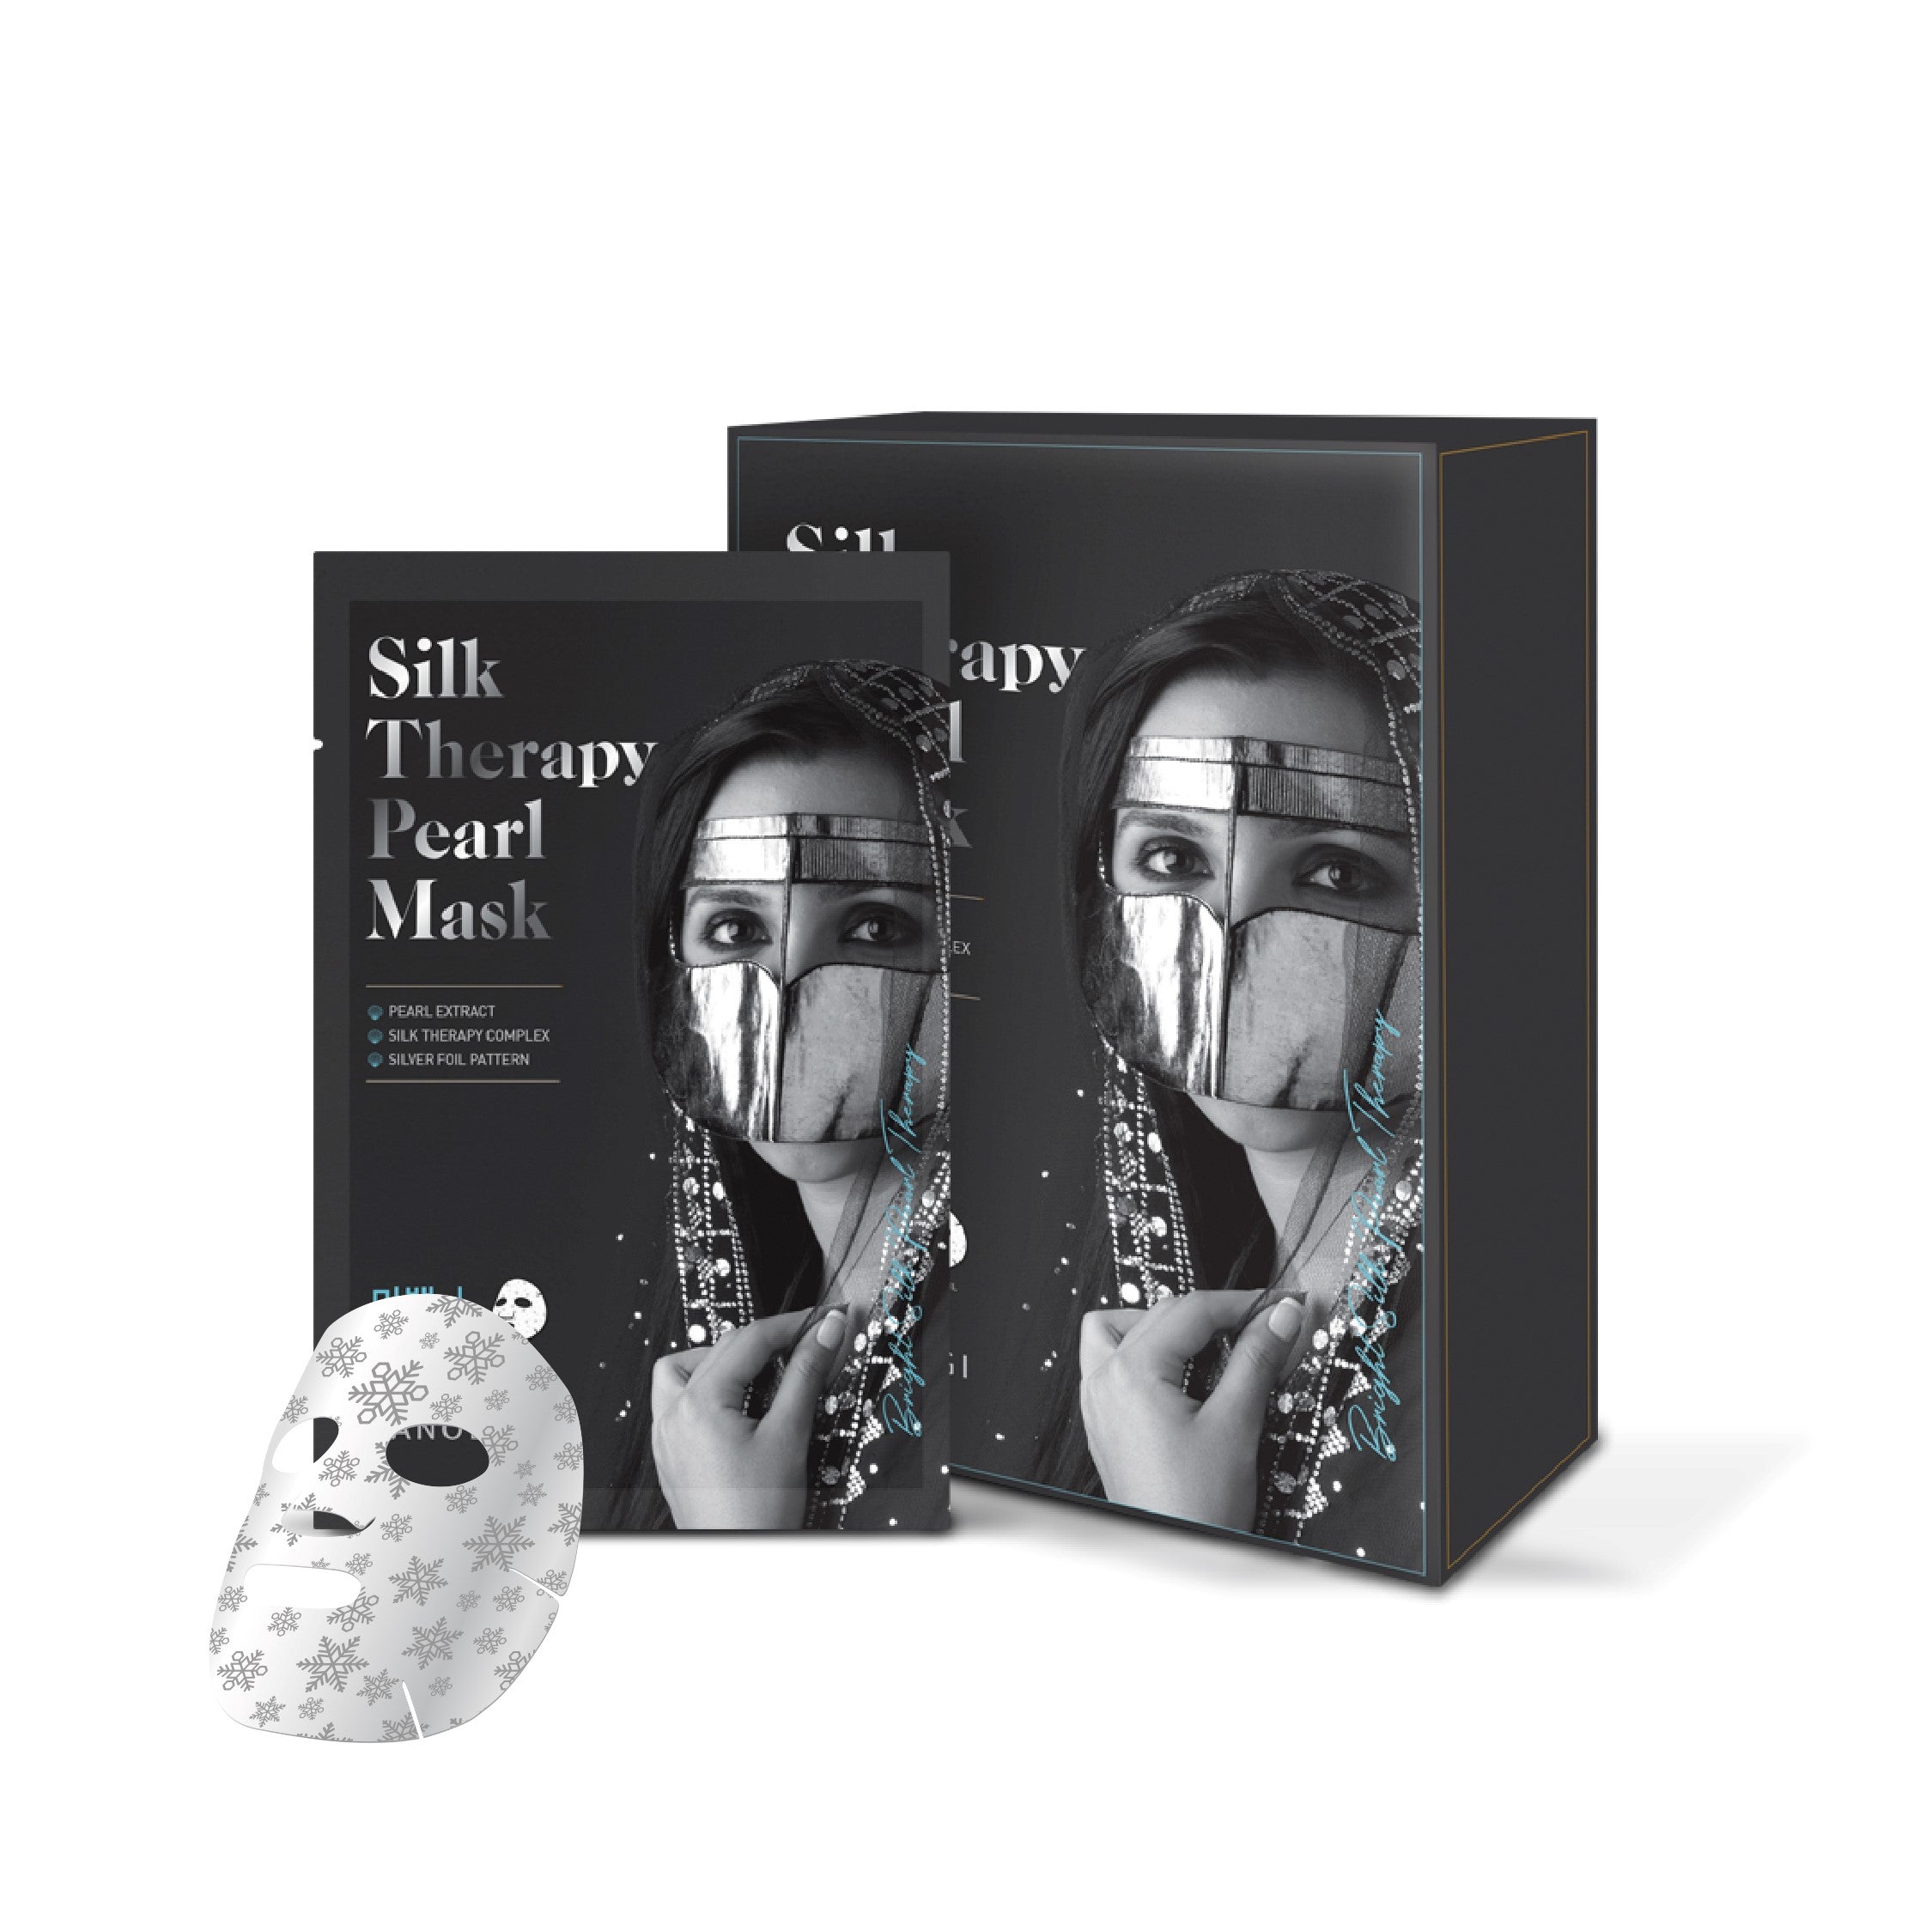 Silk Therapy Pearl Mask